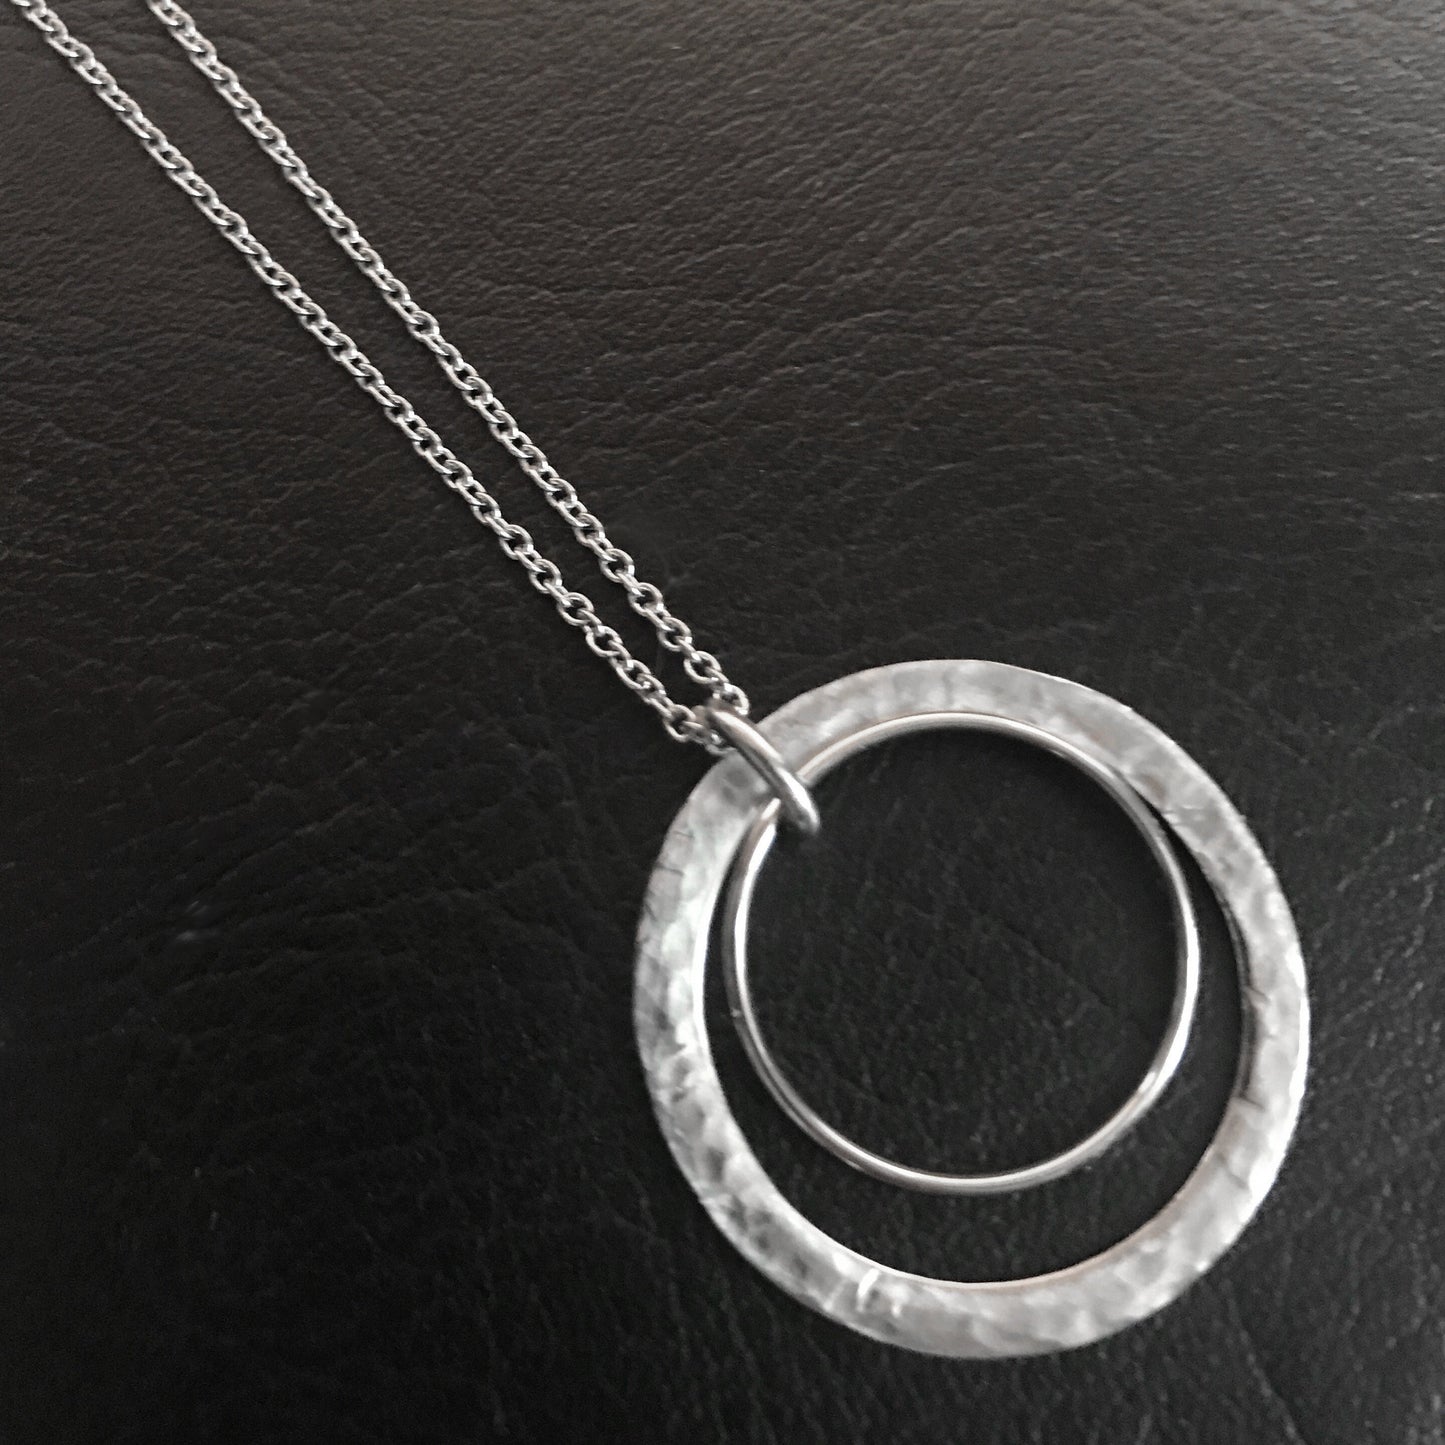 Silver Hammered Circle Necklace, 2 Two Circle Necklace, Gift for Sister, Non Tarnish, Stainless Steel Jewelry for Women, Round Pendant